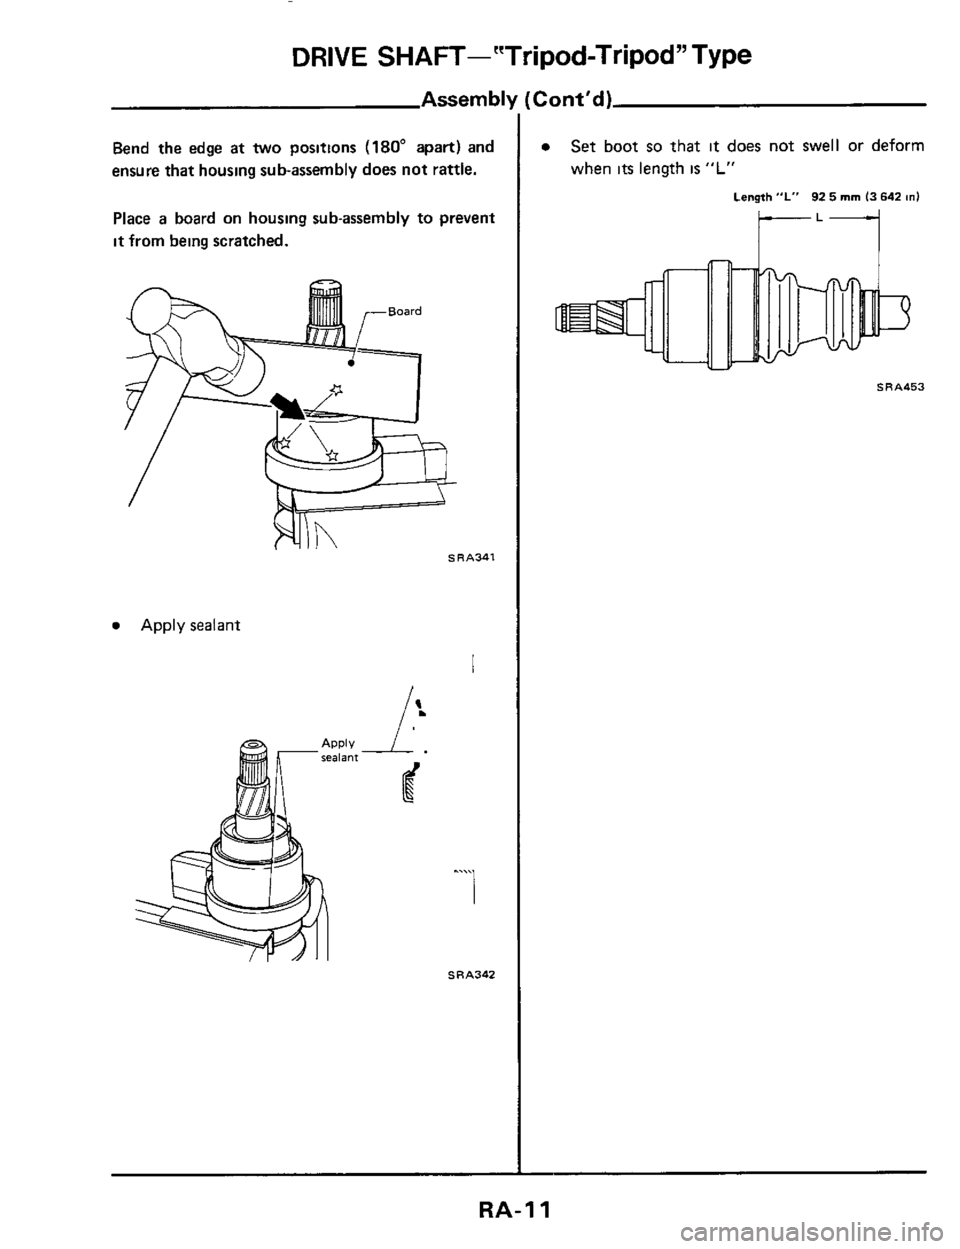 NISSAN 300ZX 1984 Z31 Rear Suspension Workshop Manual DRIVE SHAFT--"Tripod-Tripod" Type 
Assem bl1 
Bend the edge at two positions (180" apart)  and 
ensure that housing sub-assembly  does not rattle. 
Place 
a board on housing  sub-assembly  to prevent 